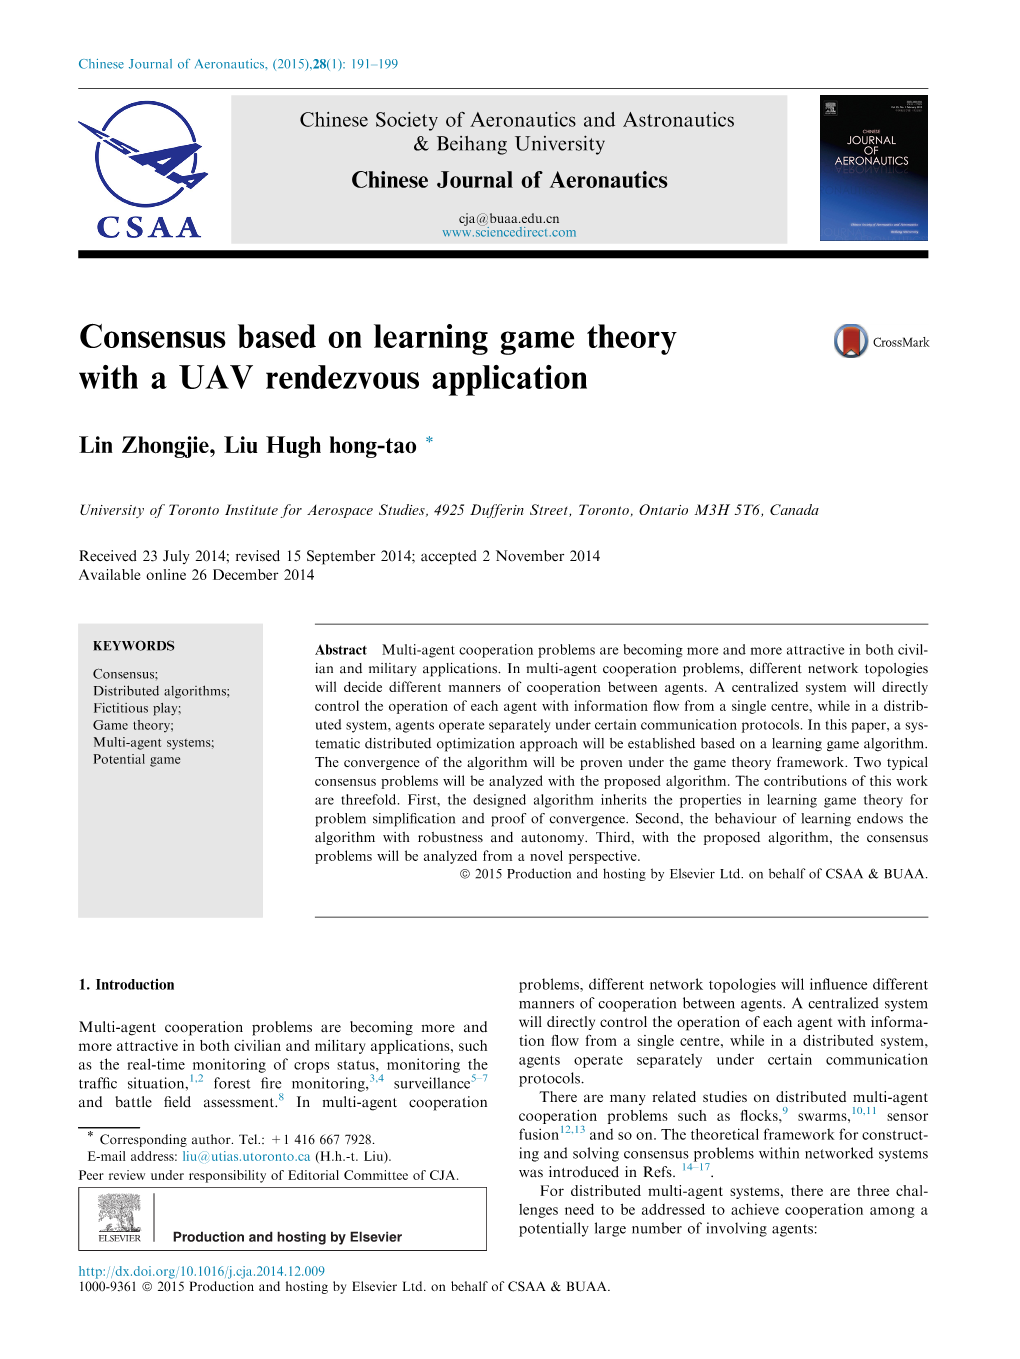 Consensus Based on Learning Game Theory with a UAV Rendezvous Application